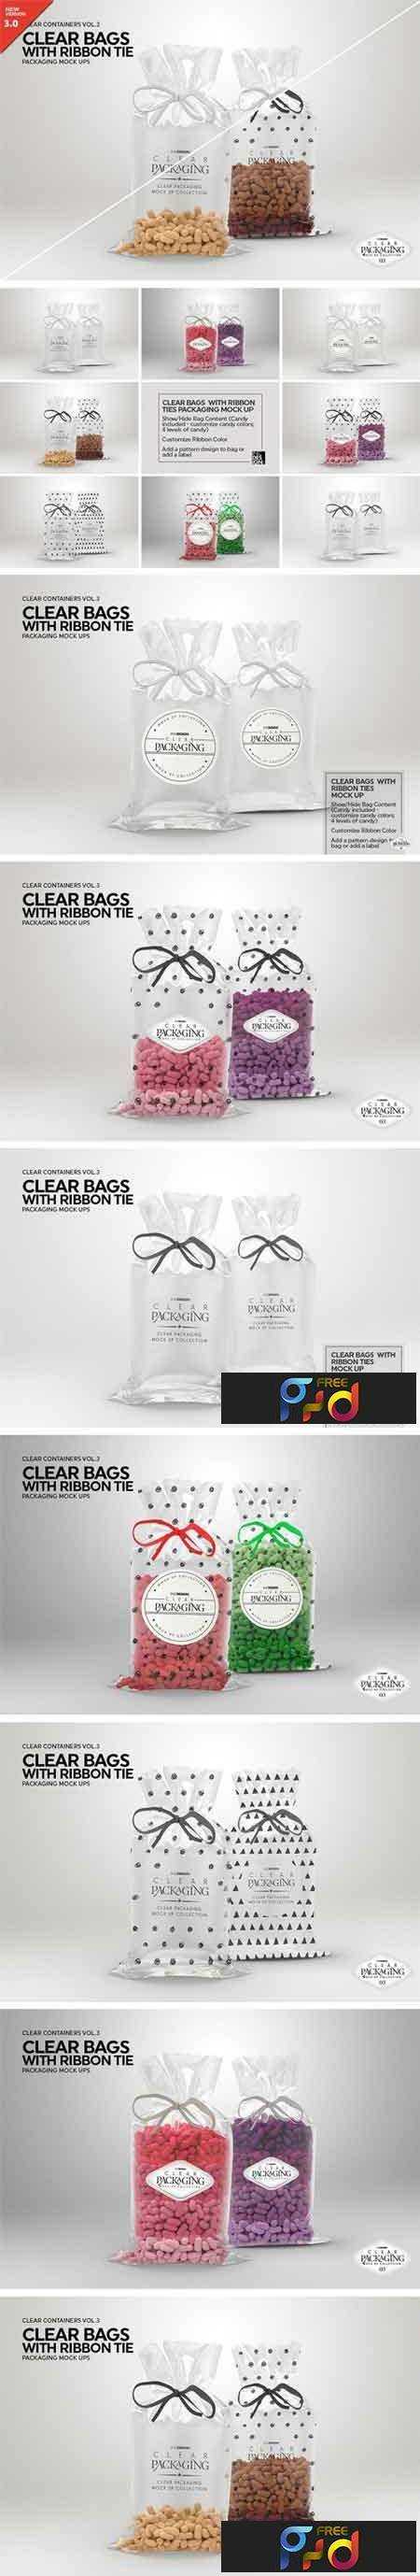 Download 1708039 Clear Candy Bags With Ribbon Mockup 2022759 Freepsdvn PSD Mockup Templates